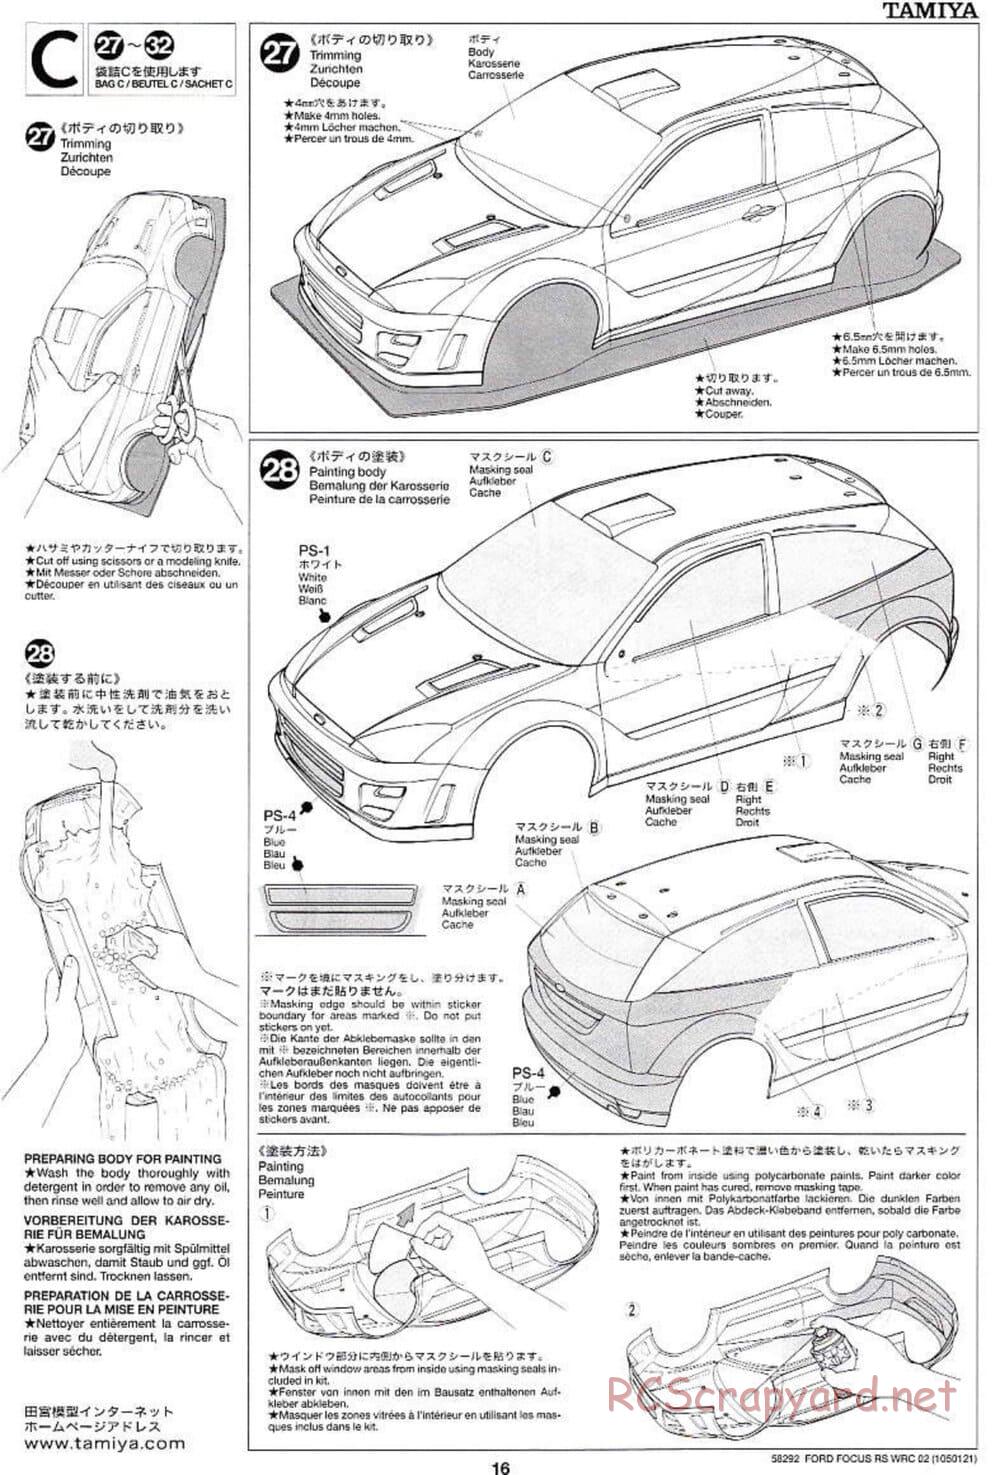 Tamiya - Ford Focus RS WRC 02 - TL-01 Chassis - Manual - Page 16